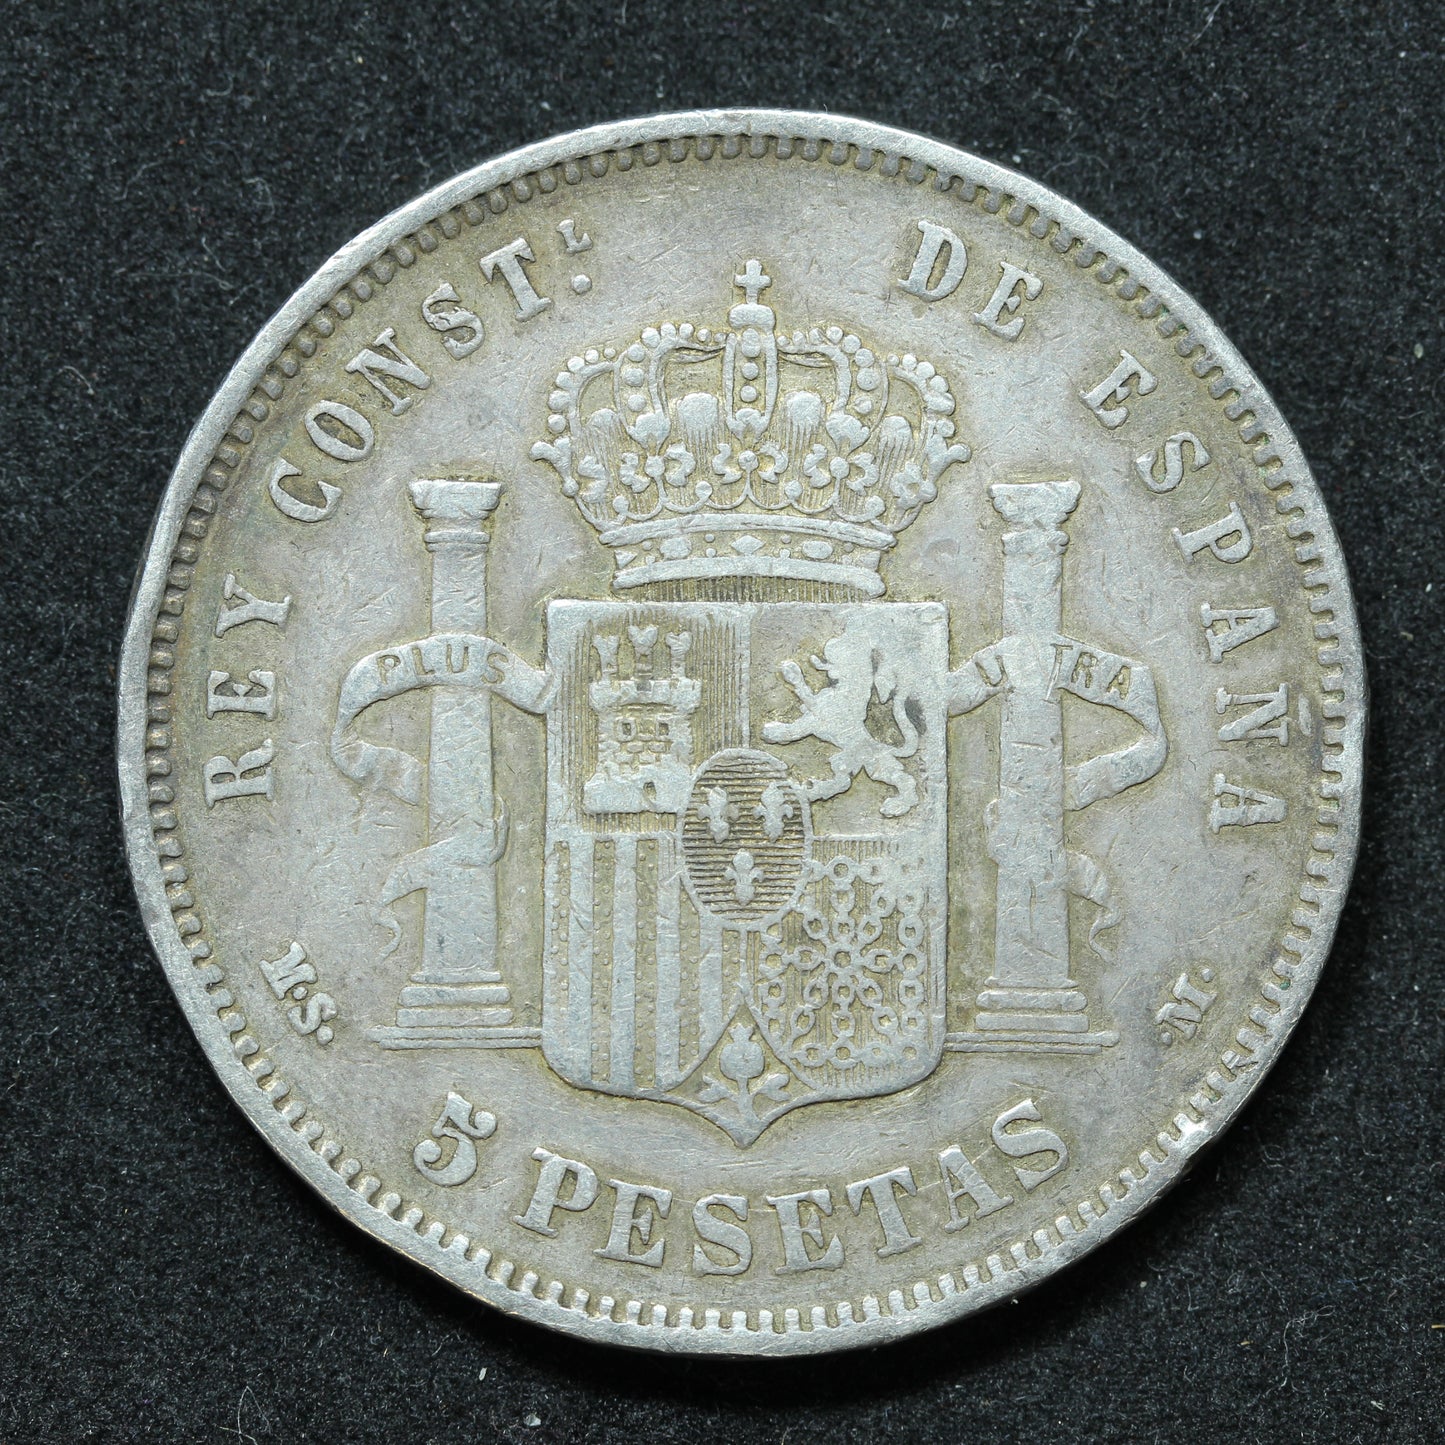 1885 5 Pesetas MS M Spain Silver Coin - ALFONSO XII - KM# 688